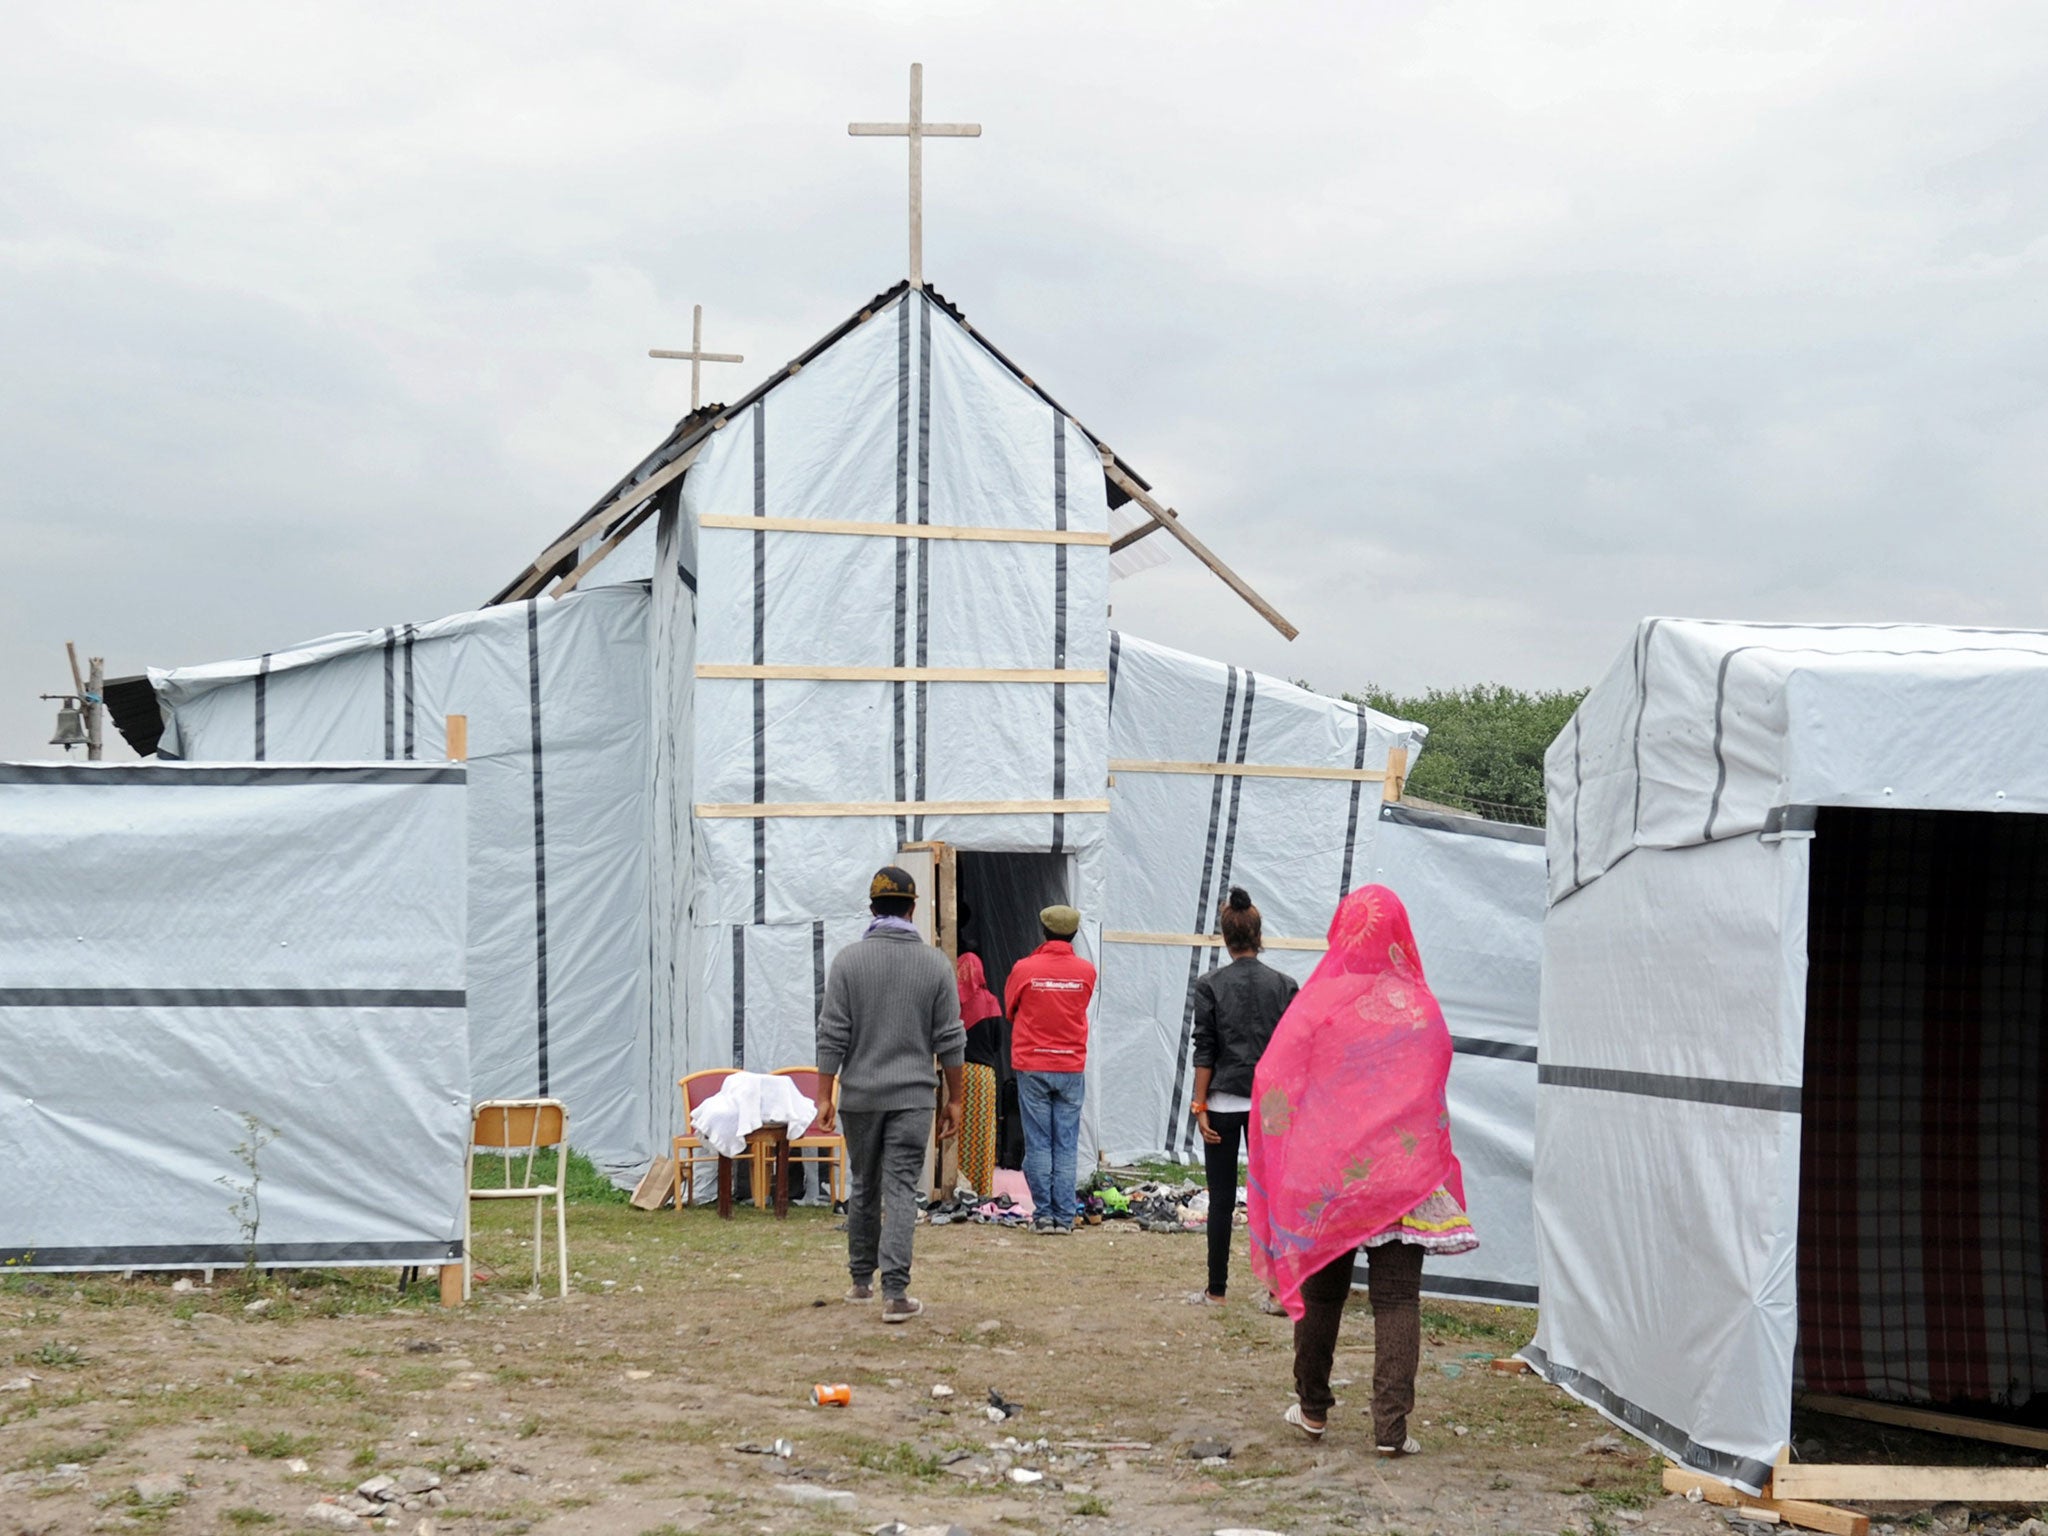 Migrants enter into the makeshift church built in the migrant camp called the 'new jungle' in Calais, near The Jungle.